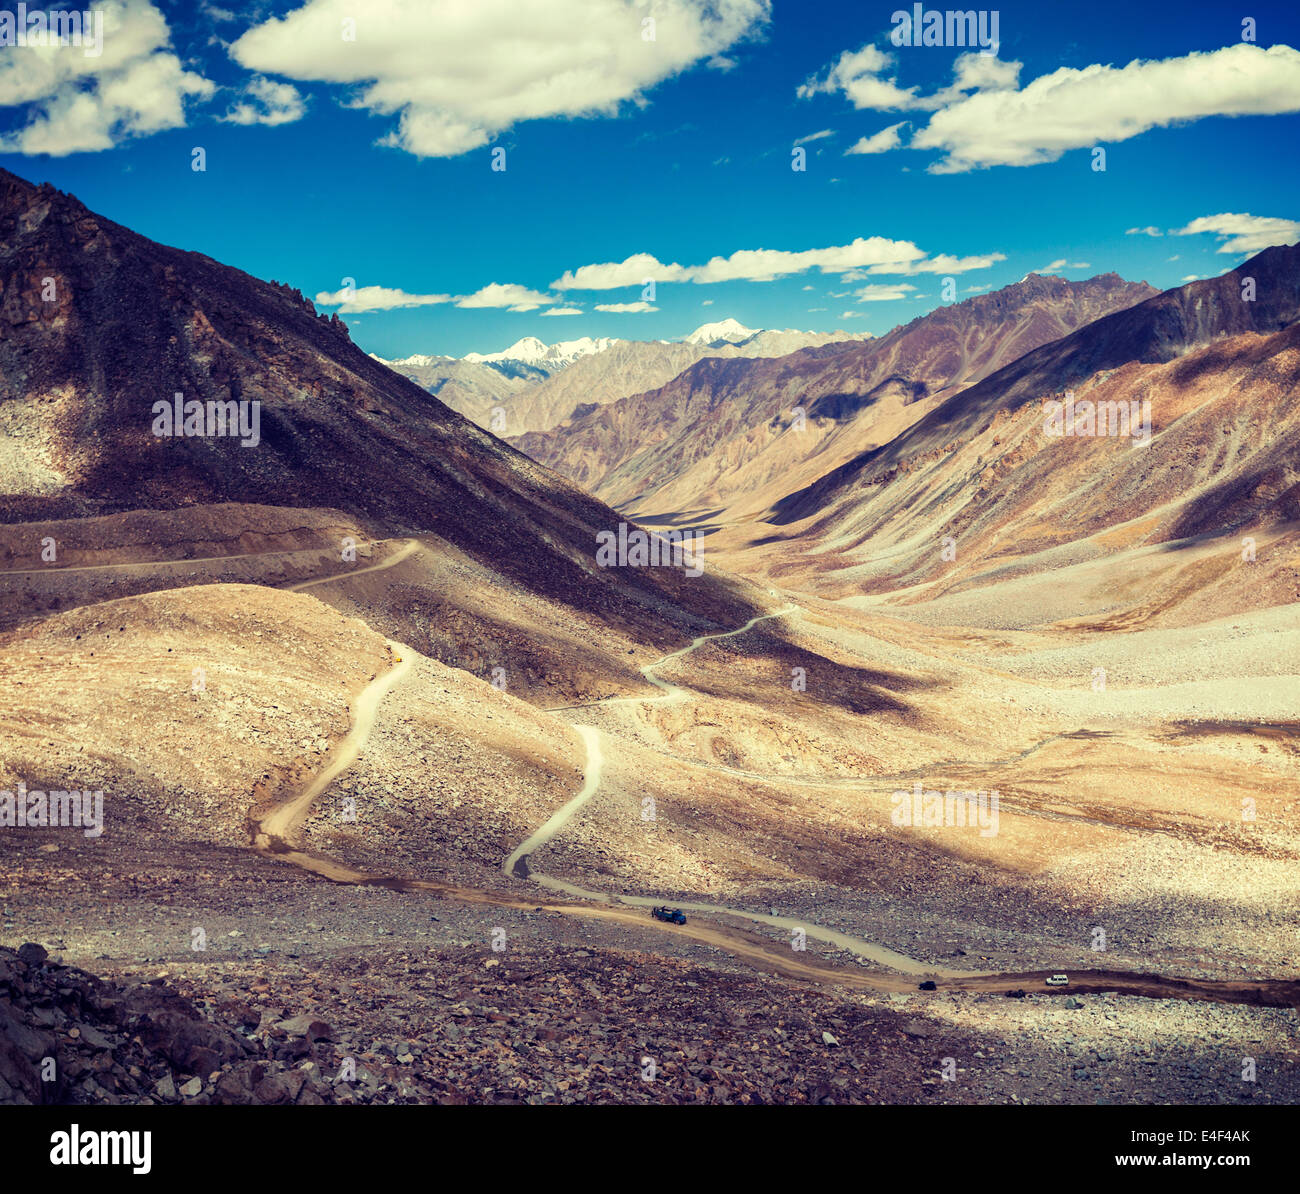 Vintage retro effect filtered hipster style travel image of Himalayan valley landscape with road near Kunzum La pass - allegedly Stock Photo